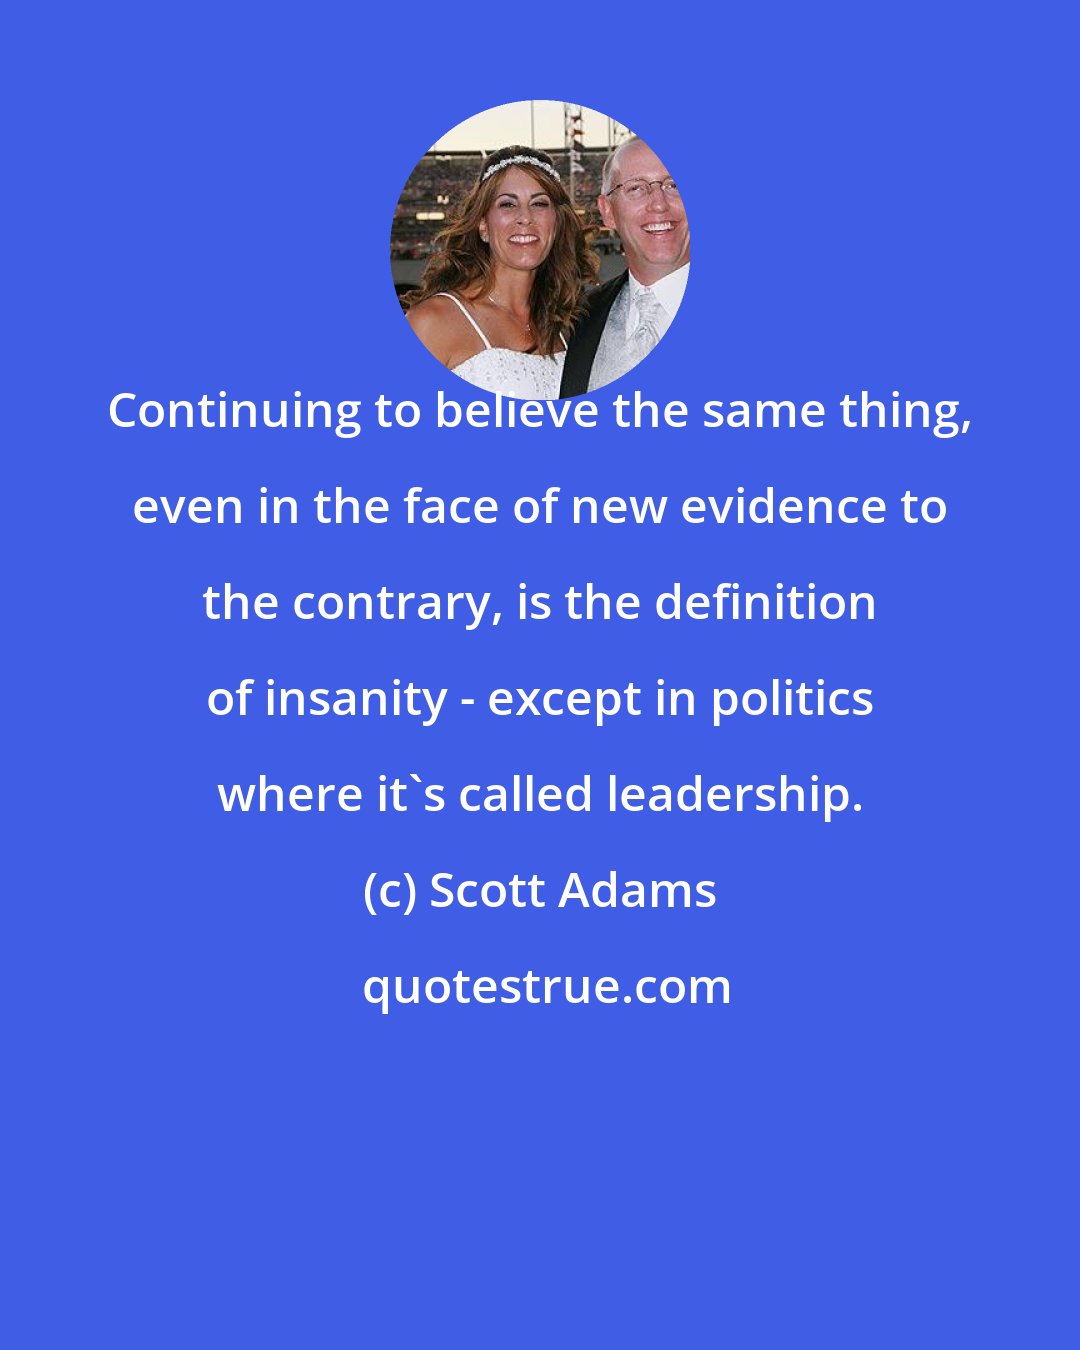 Scott Adams: Continuing to believe the same thing, even in the face of new evidence to the contrary, is the definition of insanity - except in politics where it's called leadership.